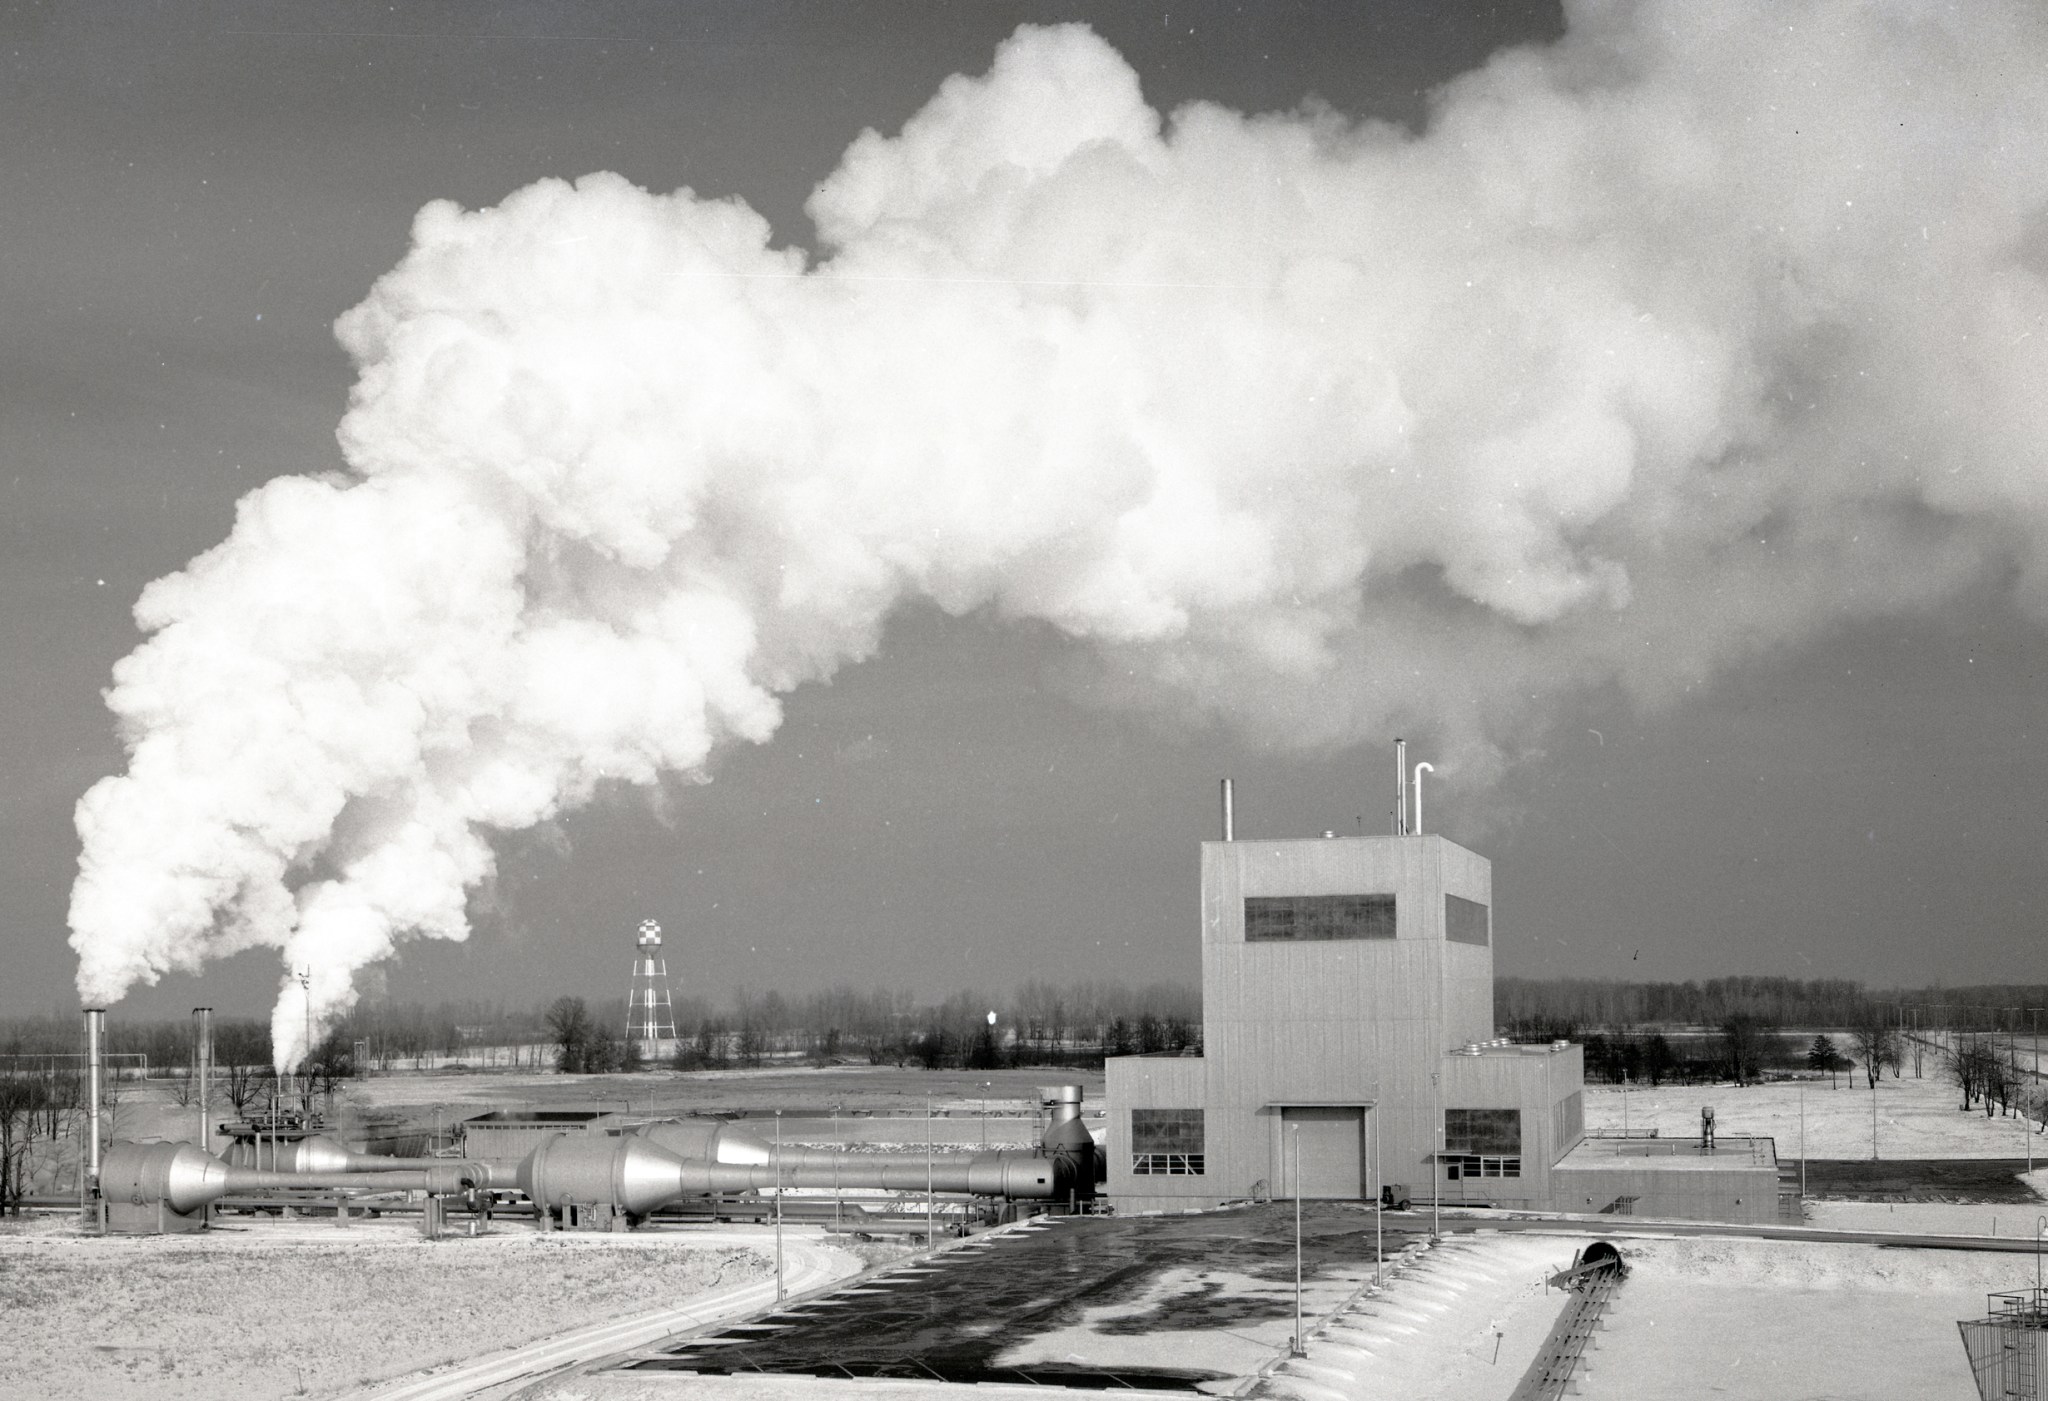 Exterior of test site with steam venting into the air.